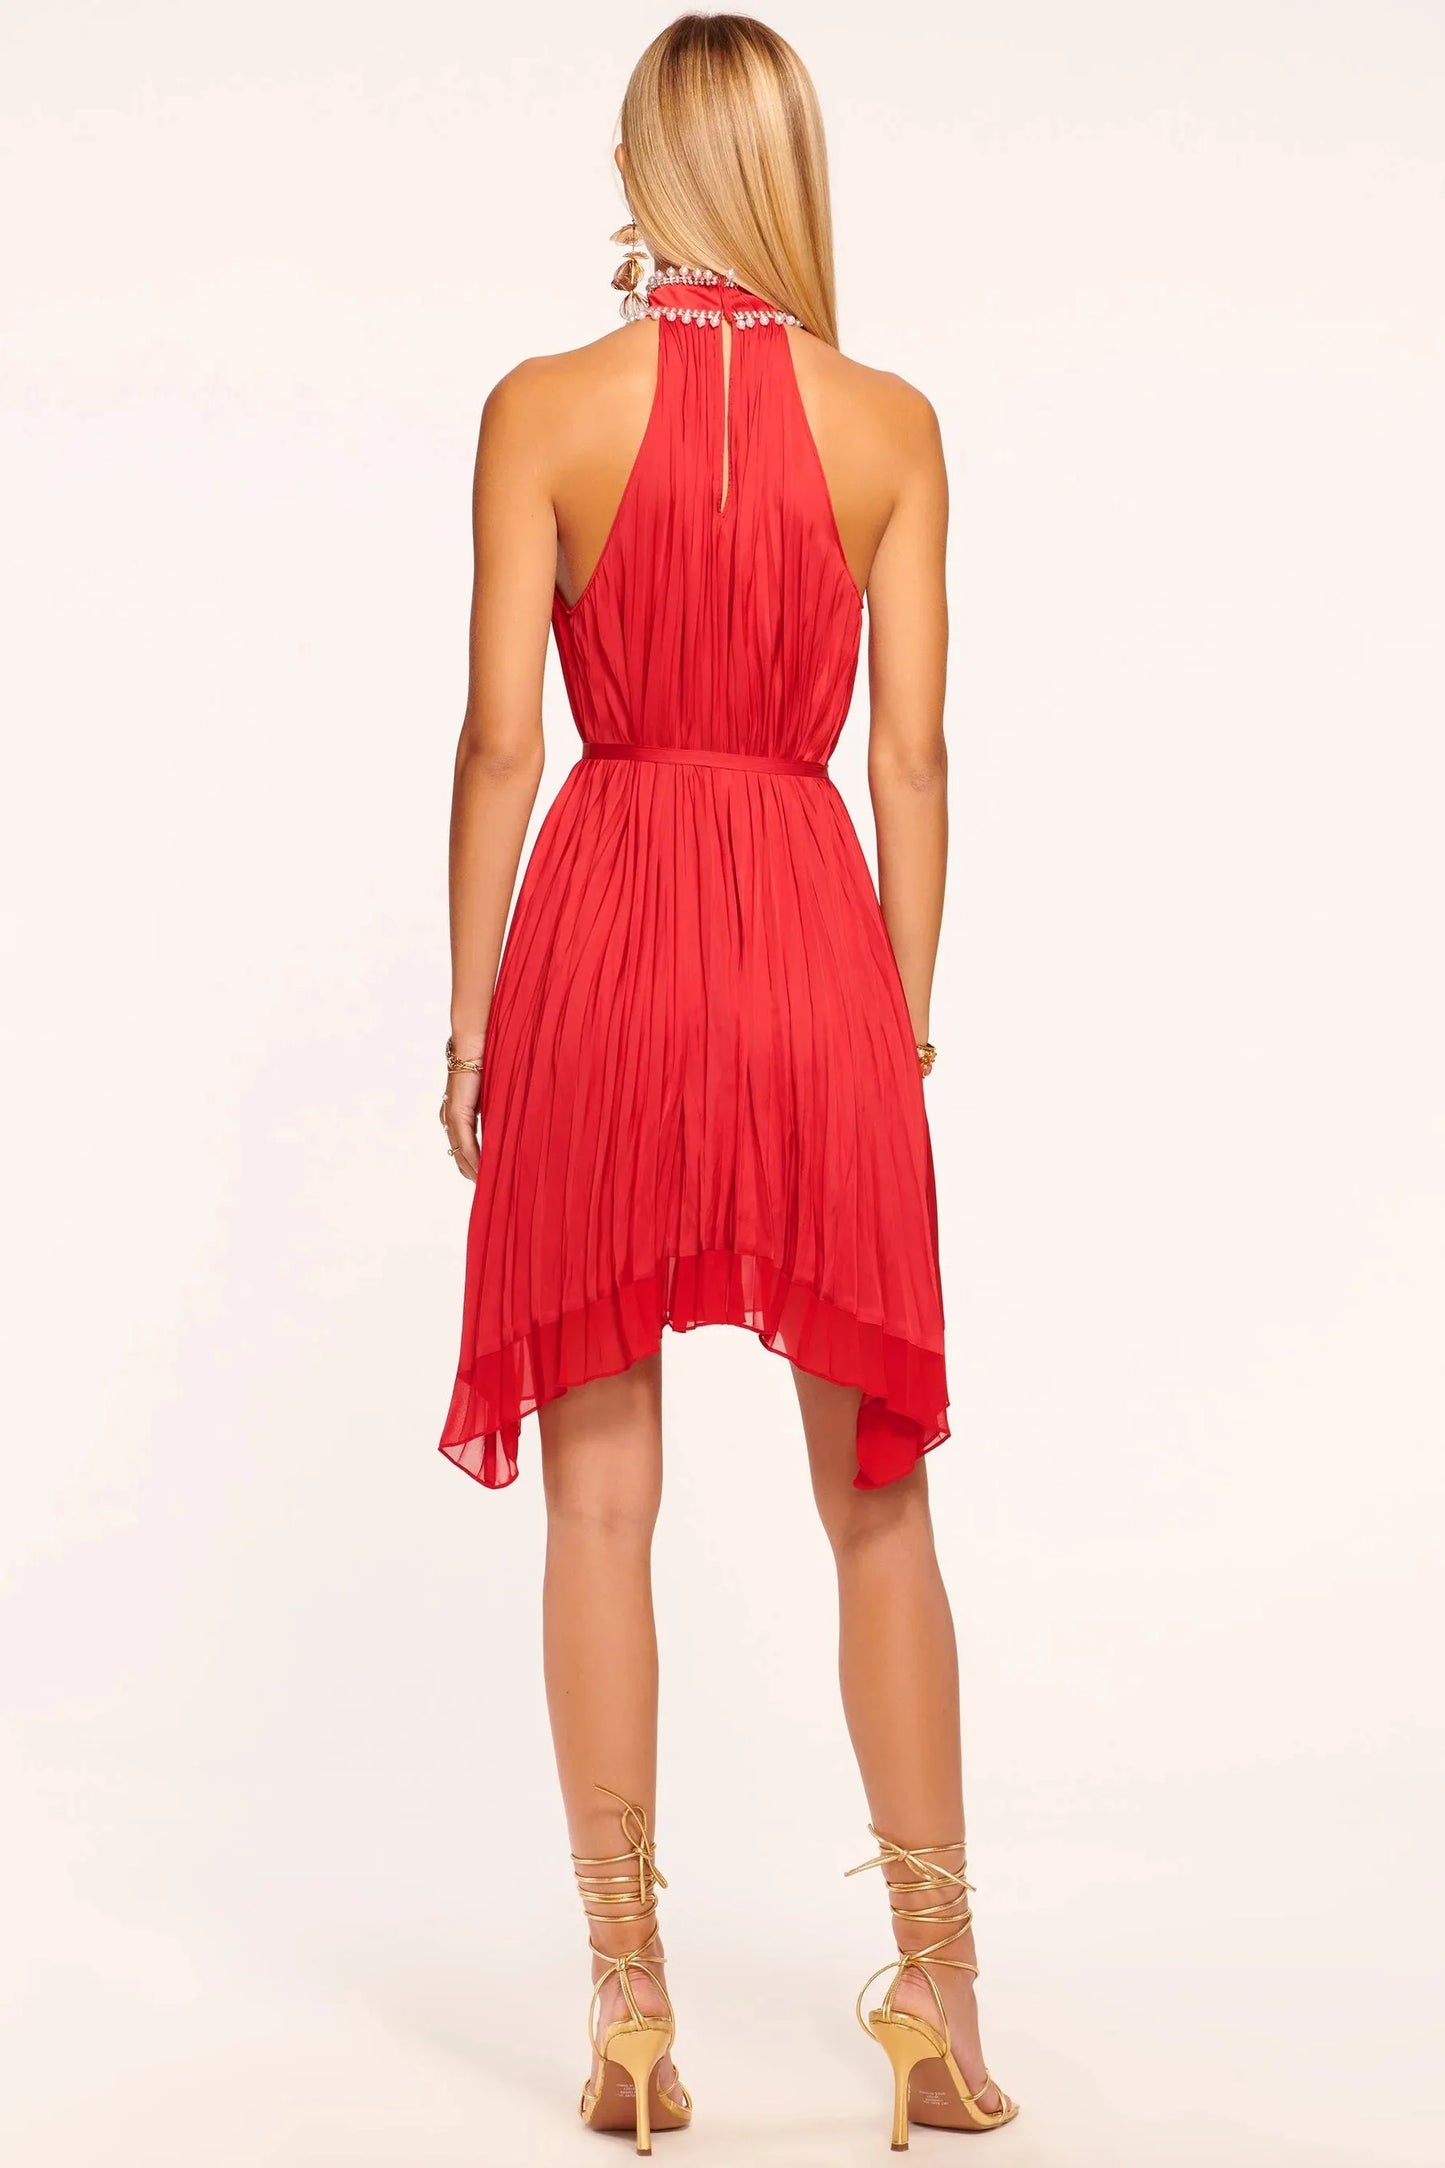 Ramy Brook - Sylvia Dress in Soiree Red